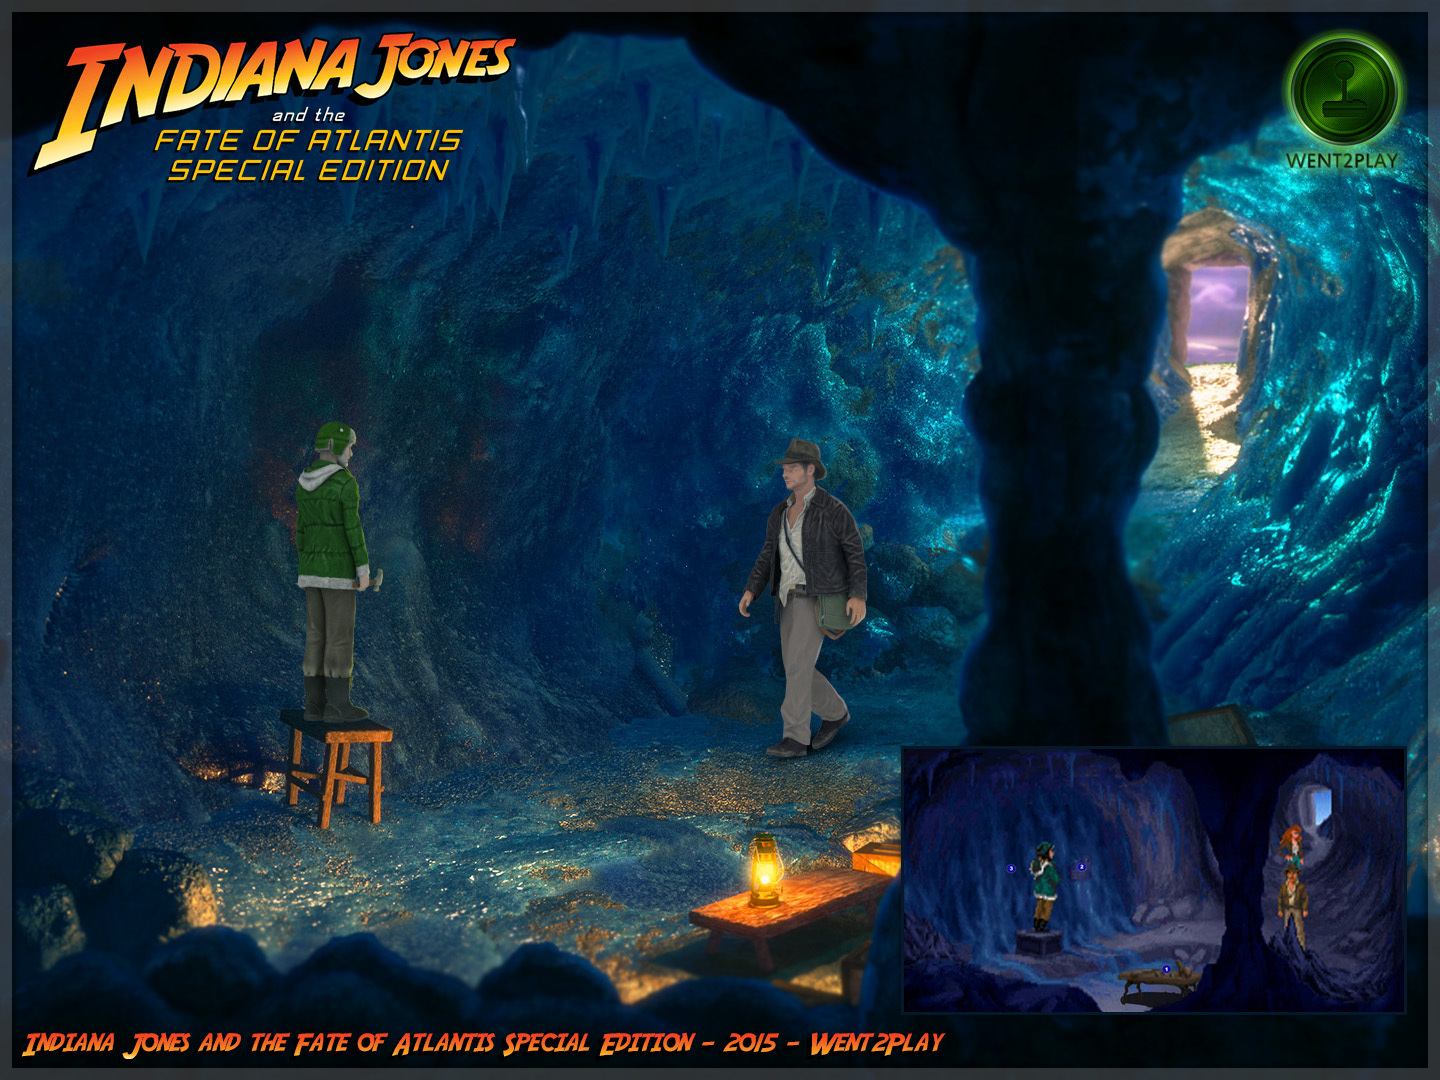 The fate of atlantis. Indiana Jones and the Fate of Atlantis. Indiana Jones and the Fate of Atlantis Special Edition. Игра Indiana Jones and the Fate of Atlantis.